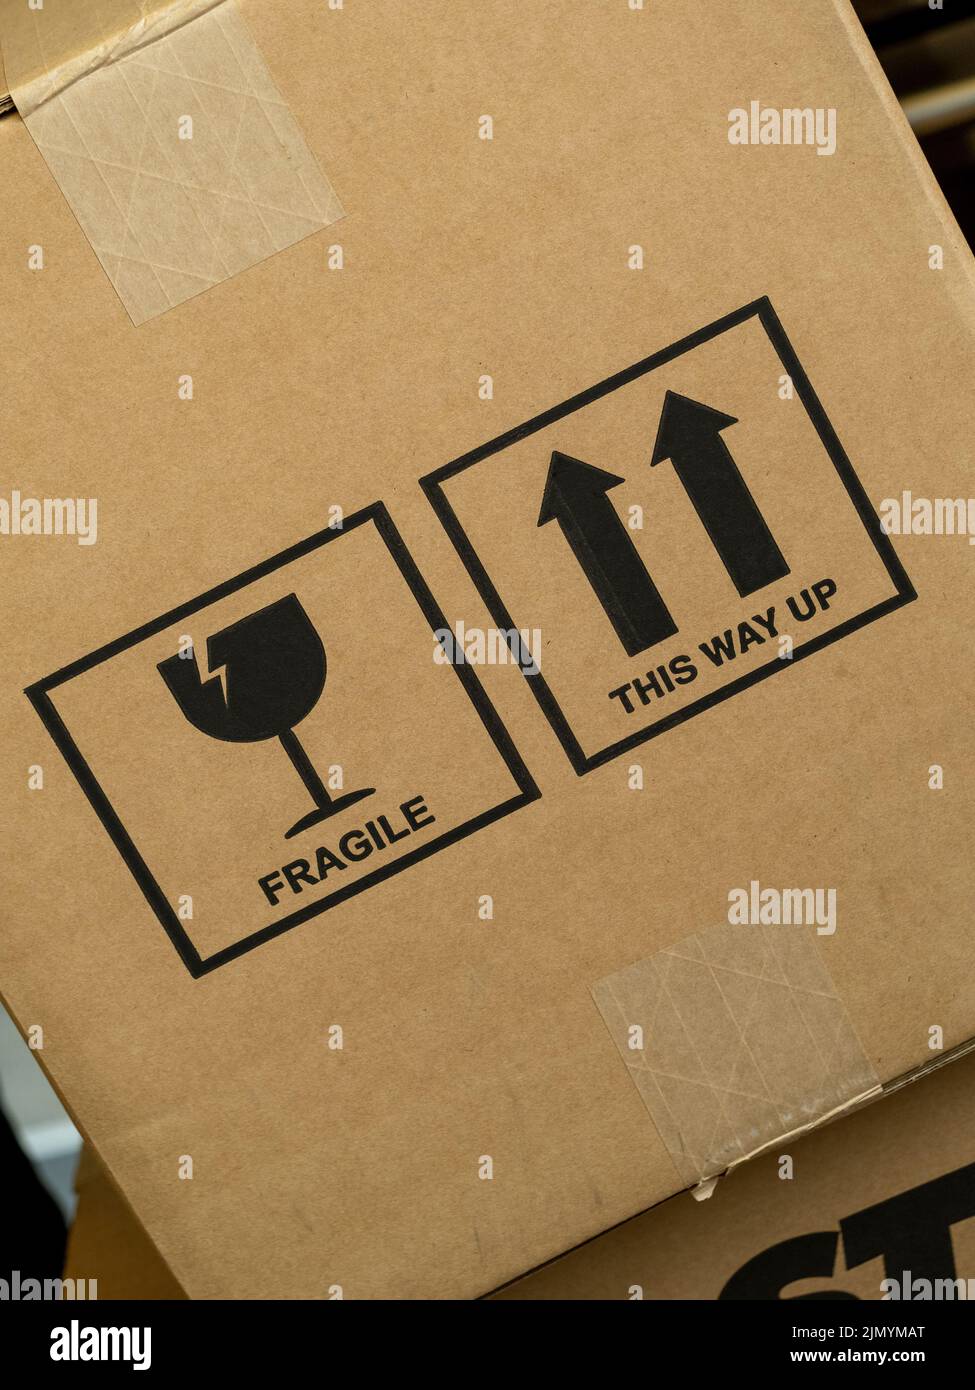 Angled cardboard box with the words Fragile and This Way Up, along with graphic icon symbols. Stock Photo